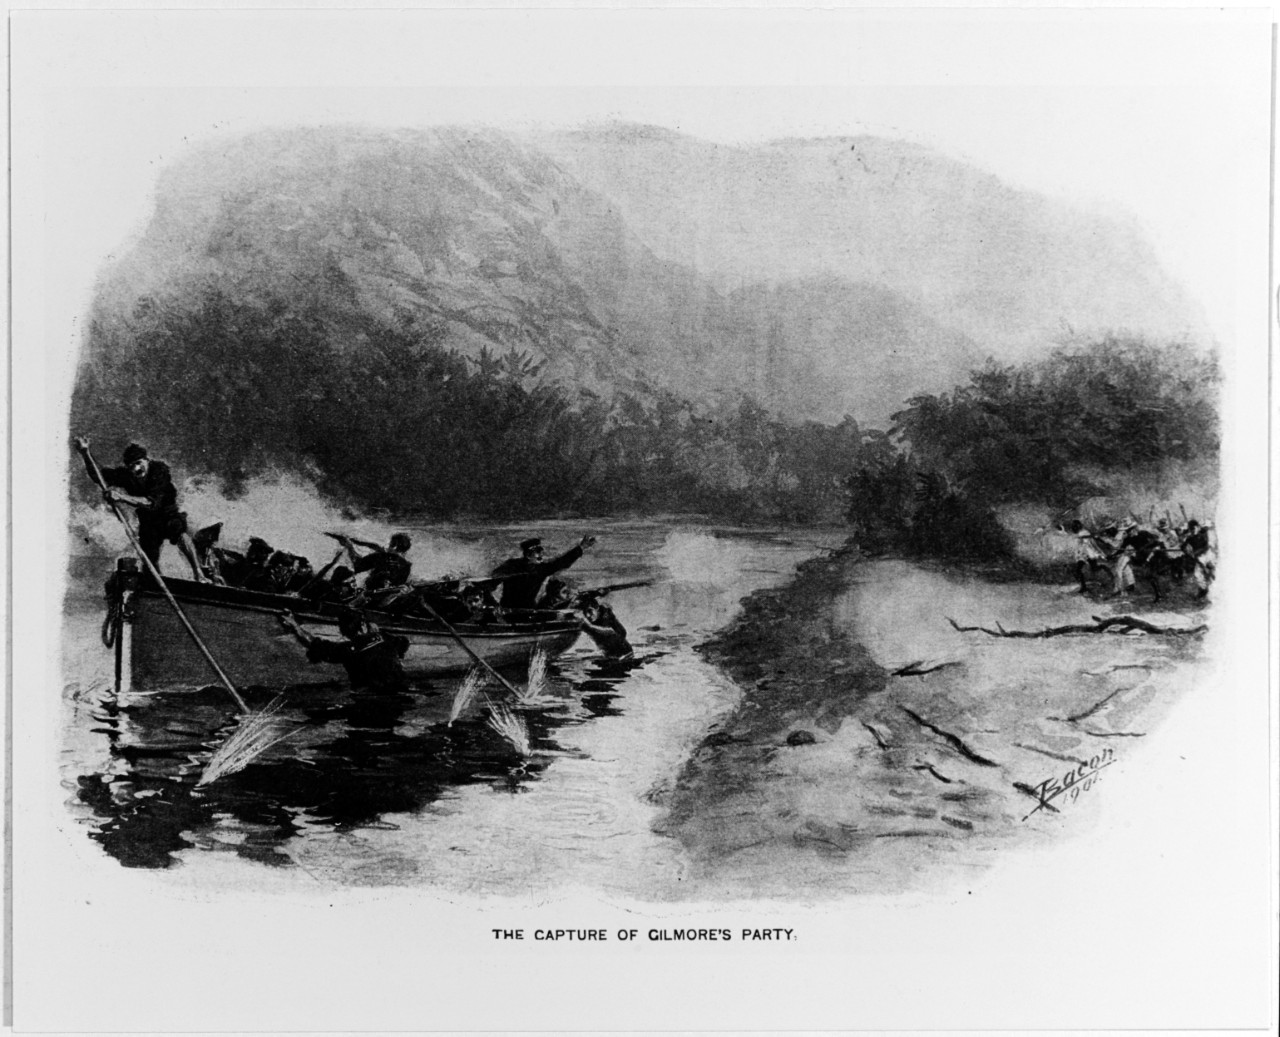 "The Capture of Gilmore's Party" 12 April 1899